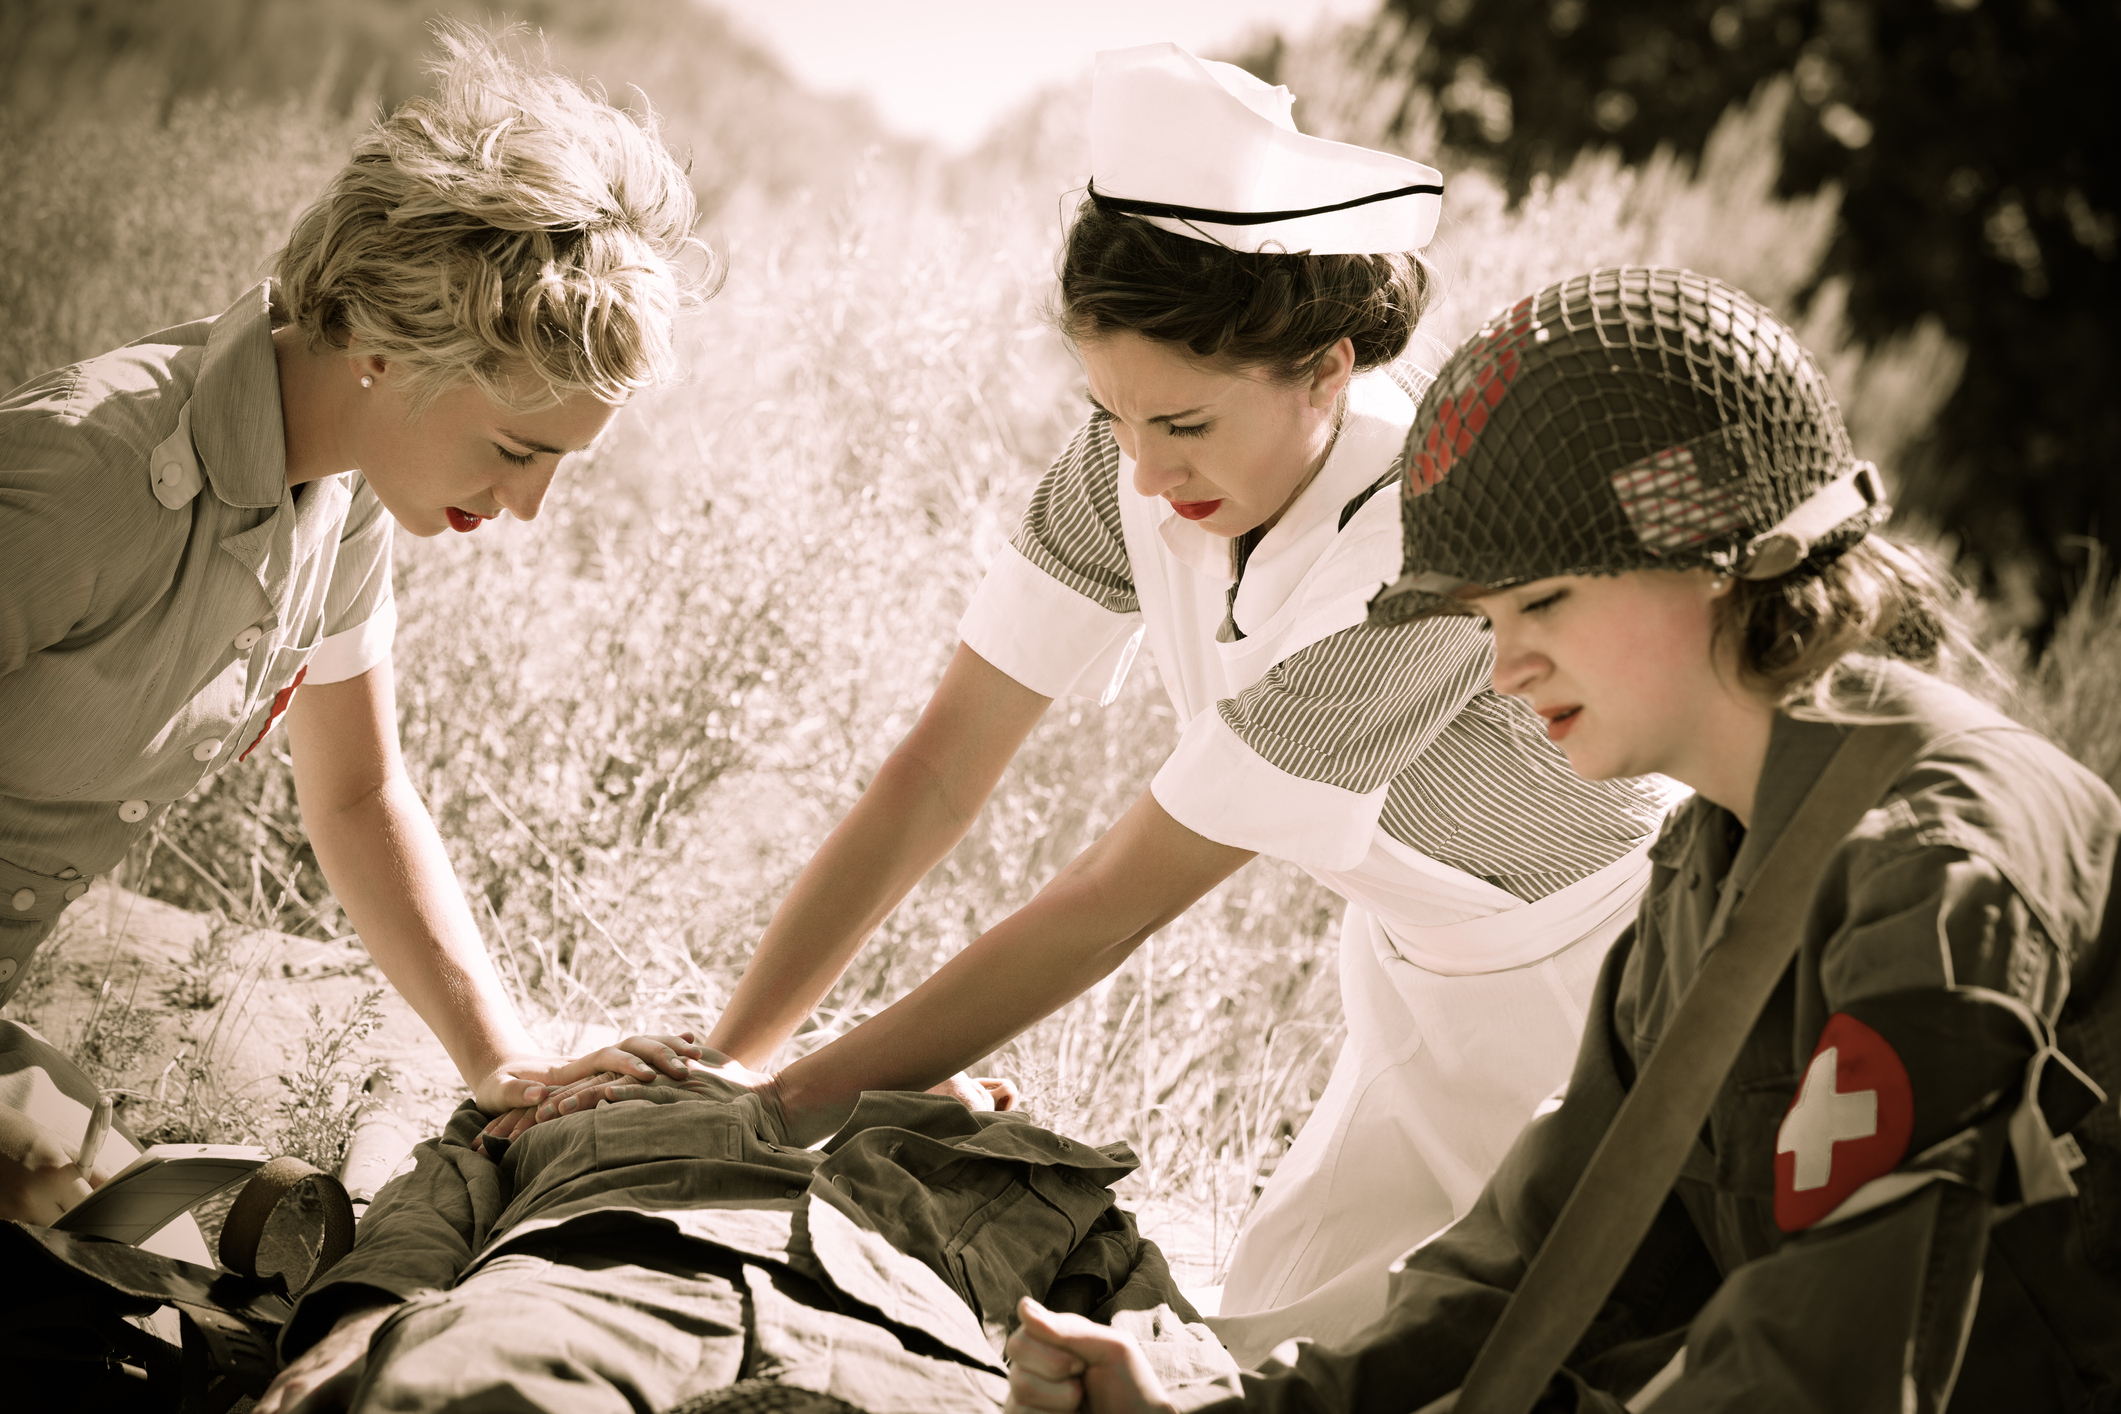 Female nurses & medic assisting wounded soldier in field